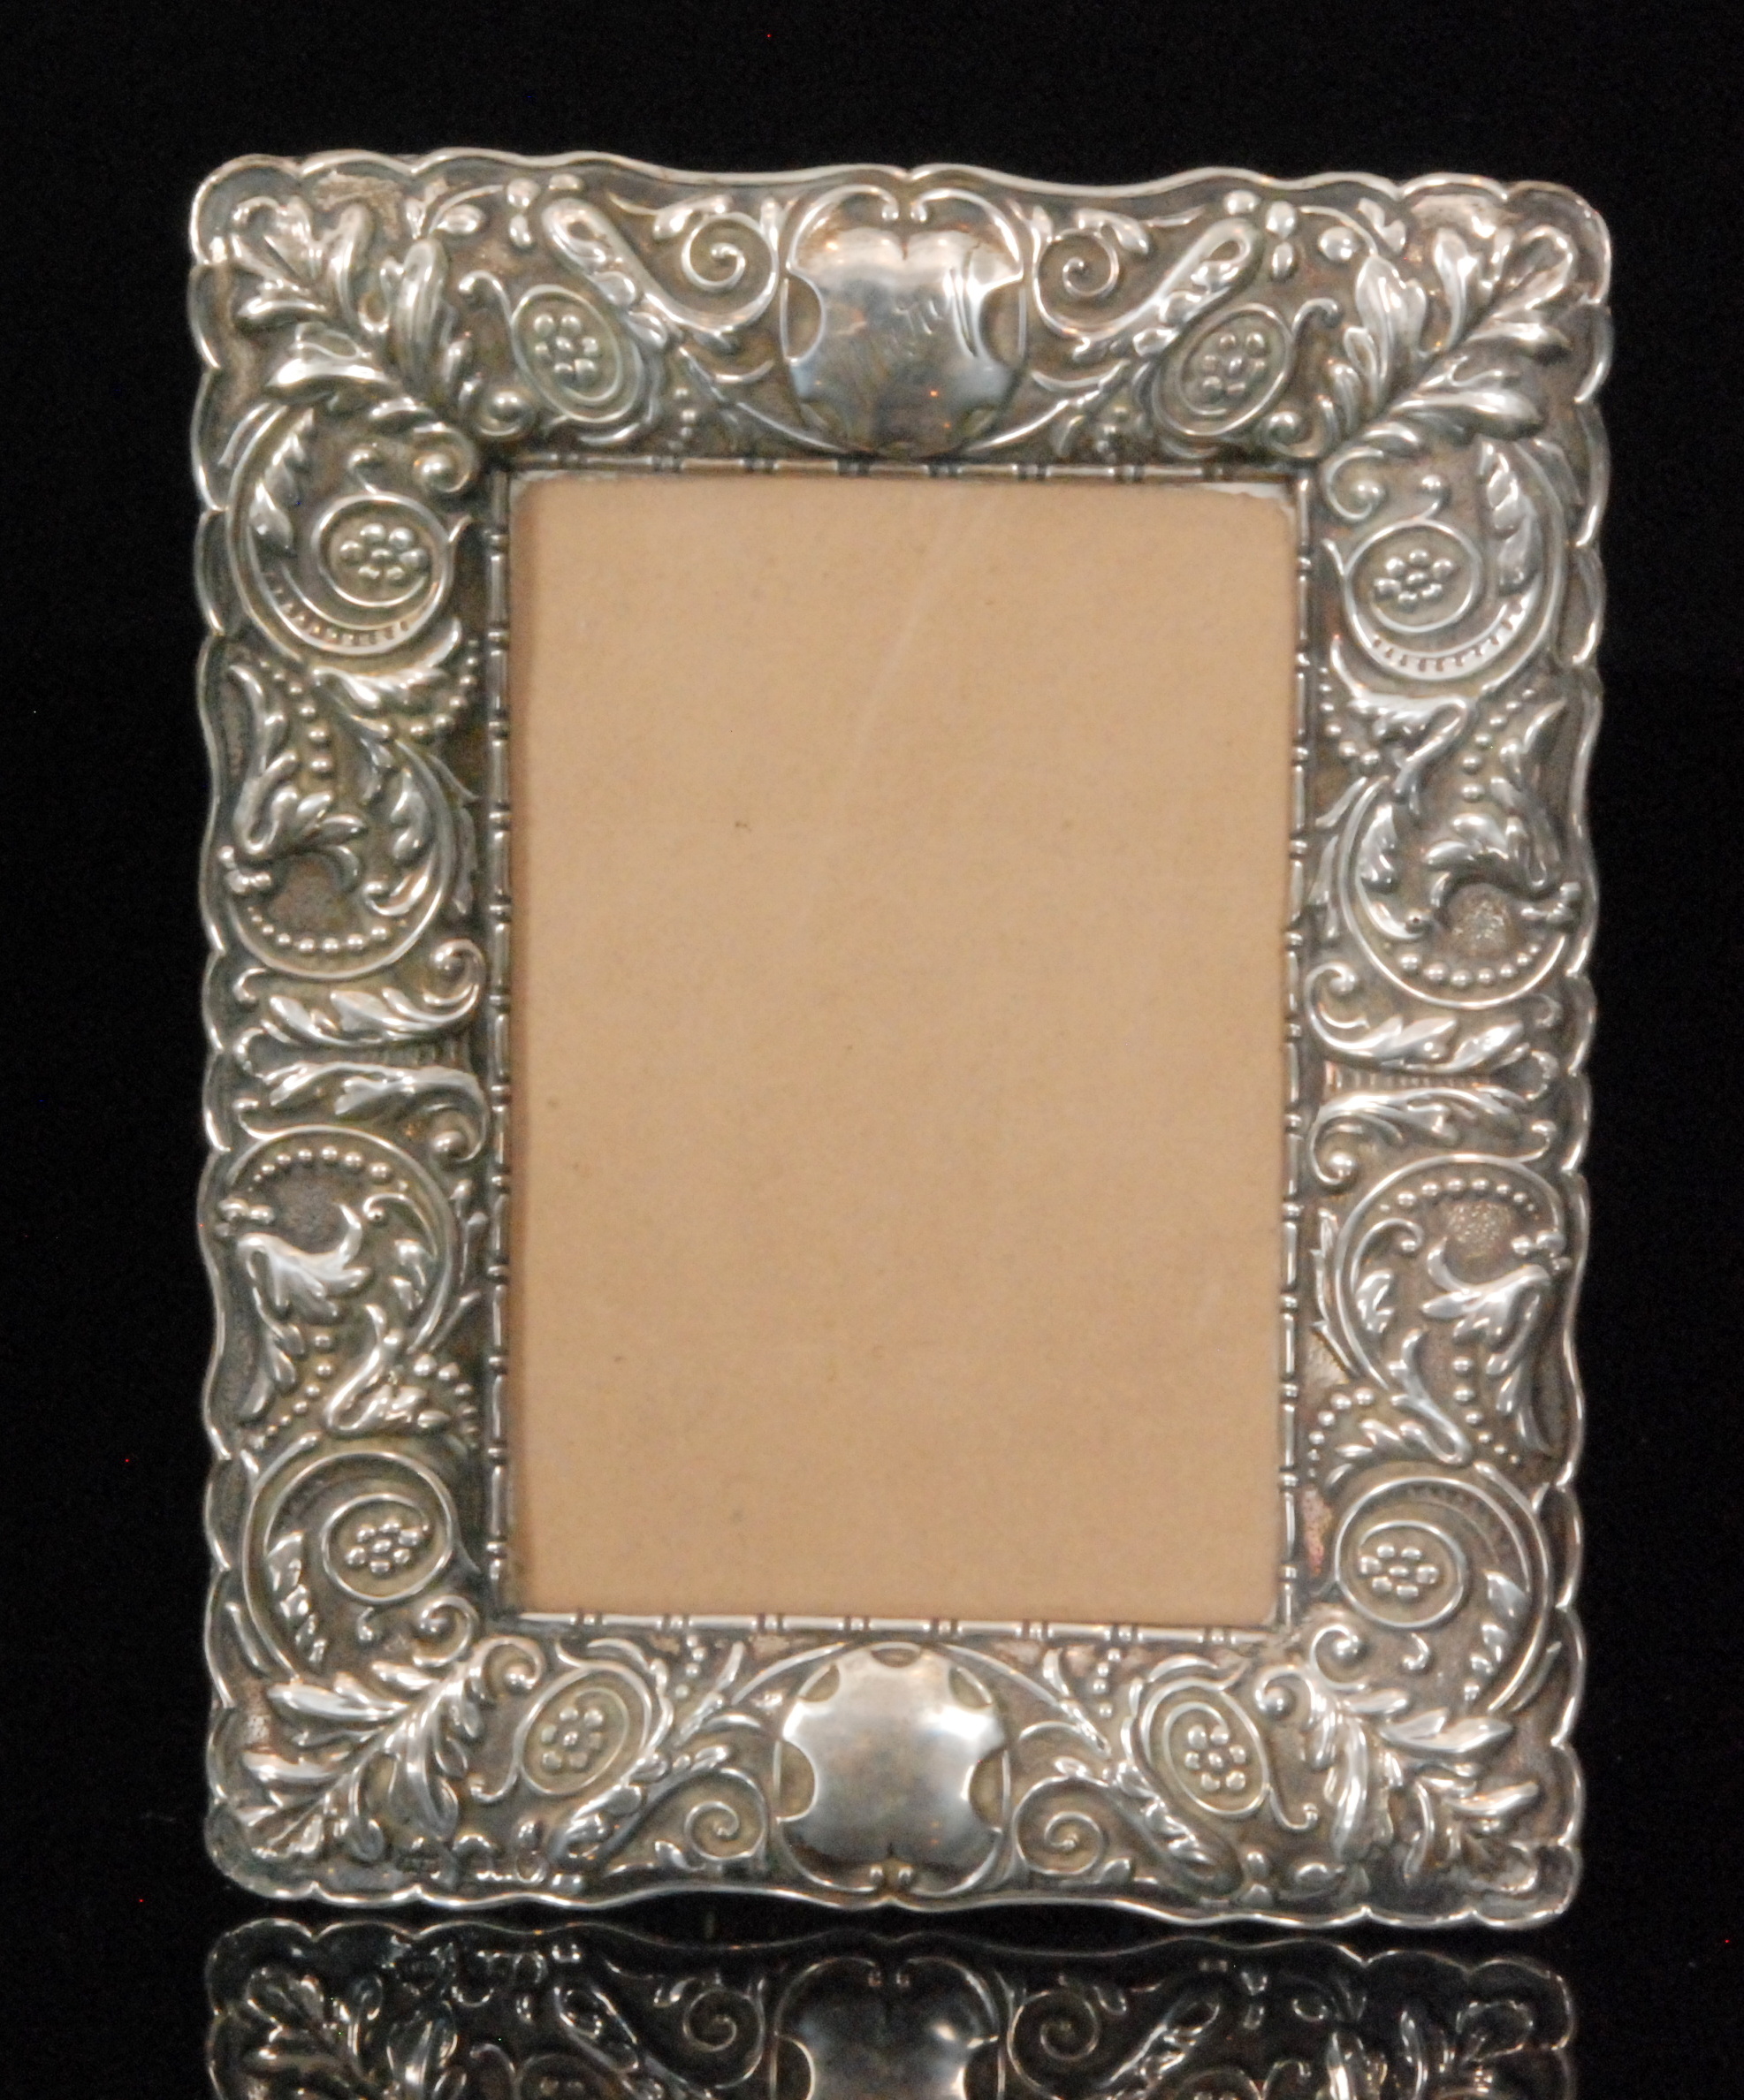 A Victorian hallmarked silver rectangular easel photograph frame profusely decorated with foliate